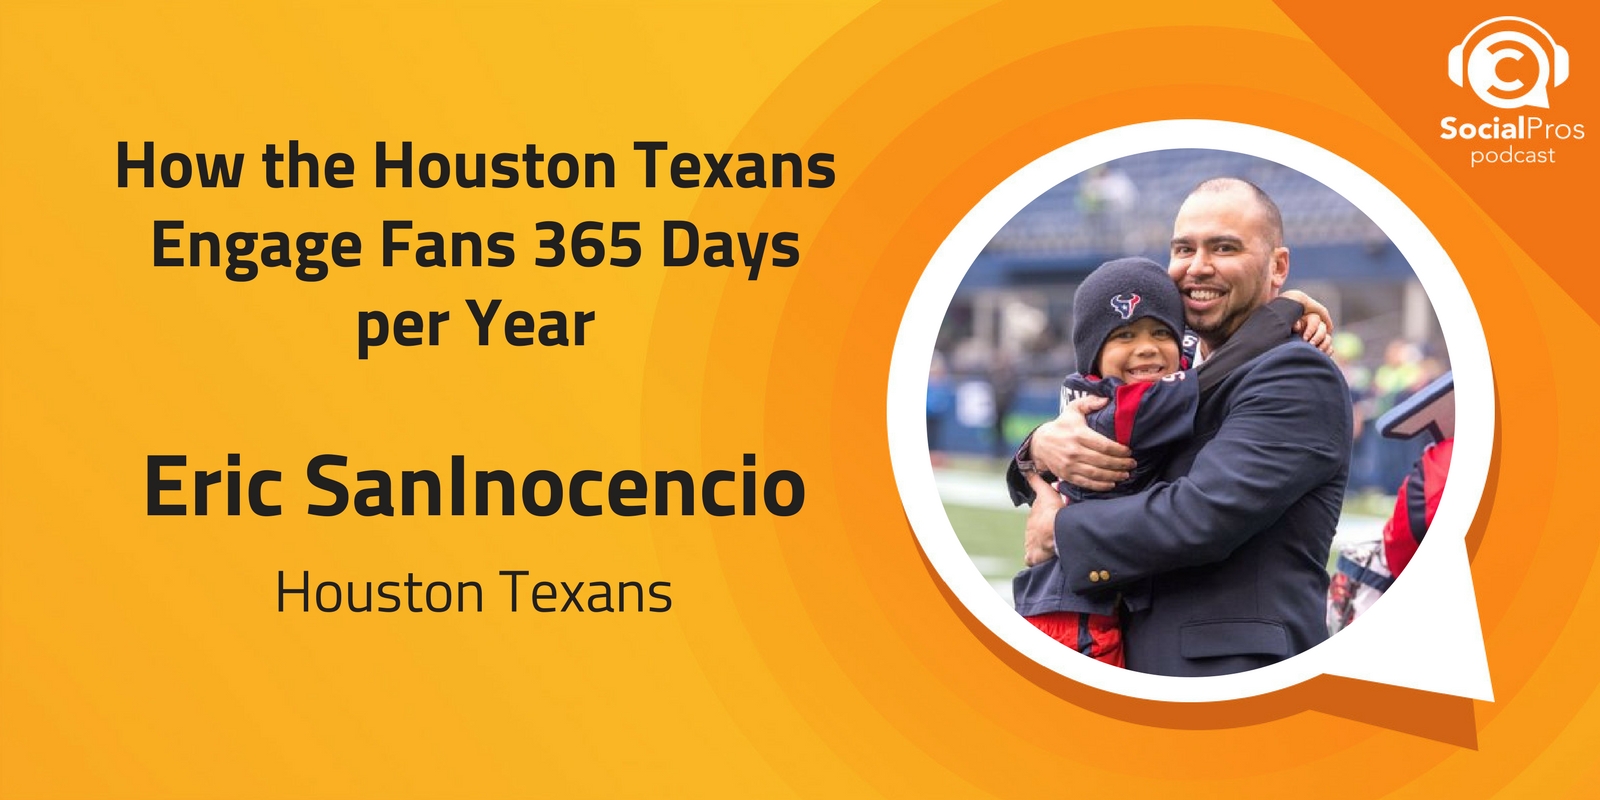 How the Houston Texans Engage Fans 365 Days per Year